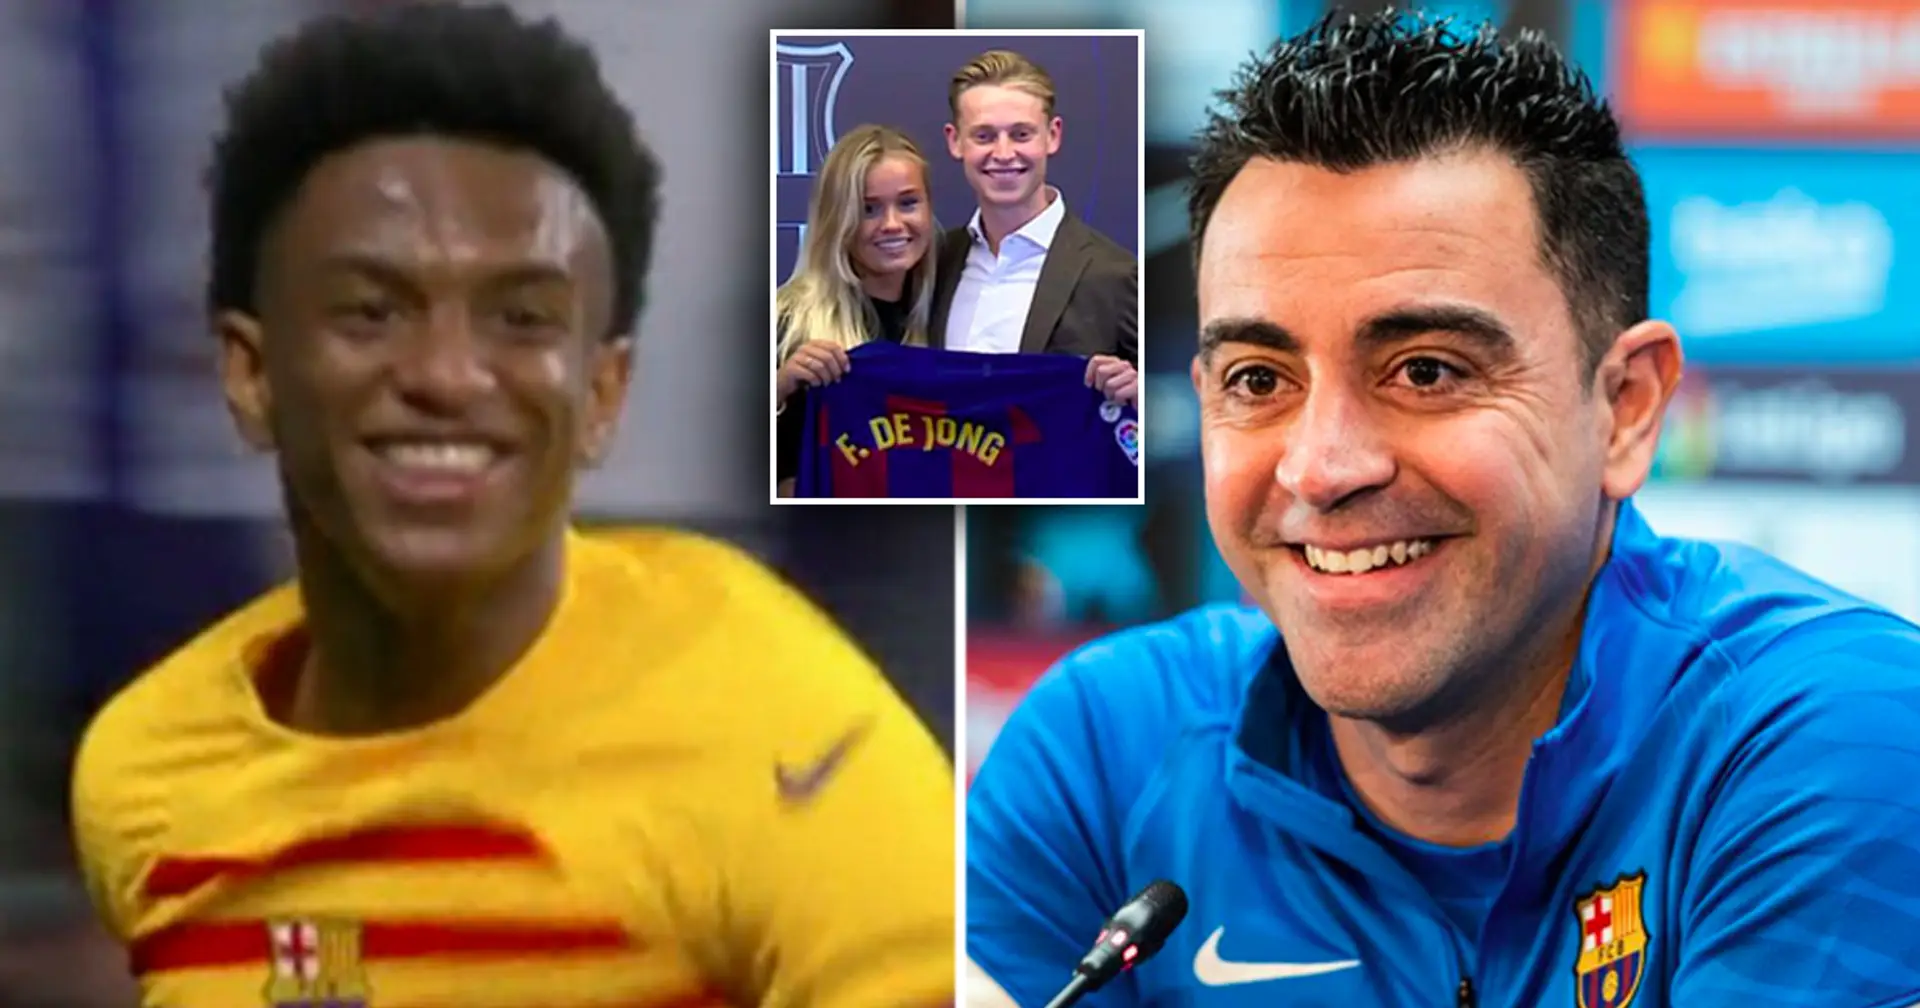 Fan lists 5 things Xavi 'never gets credit for' – includes getting the best out of €86m signing